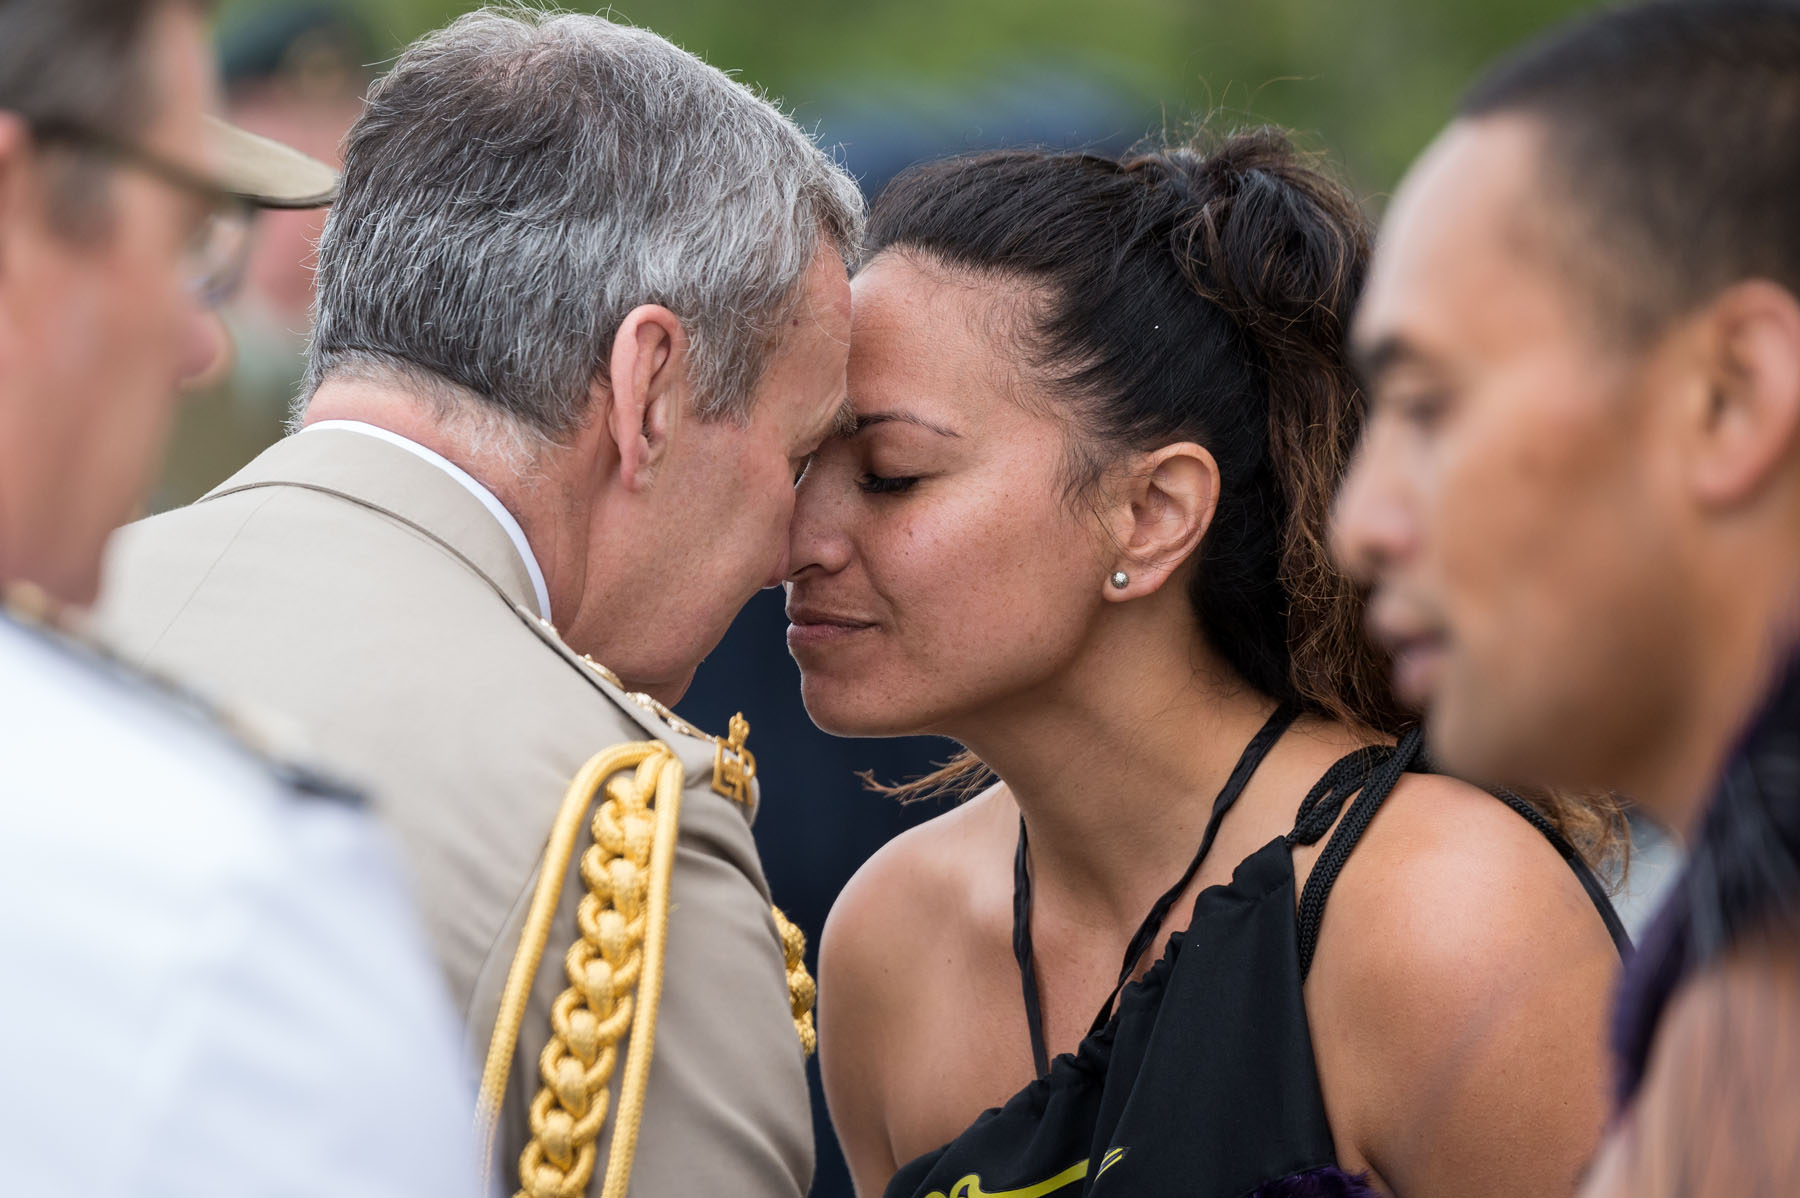 New Zealand Chief of Army Writing Competition Winner of the Non-Commissioned Officer (NCO) Category: Diversity and Inclusion Threats to the NZ Army’s Warrior Ethos and War-Fighting Culture